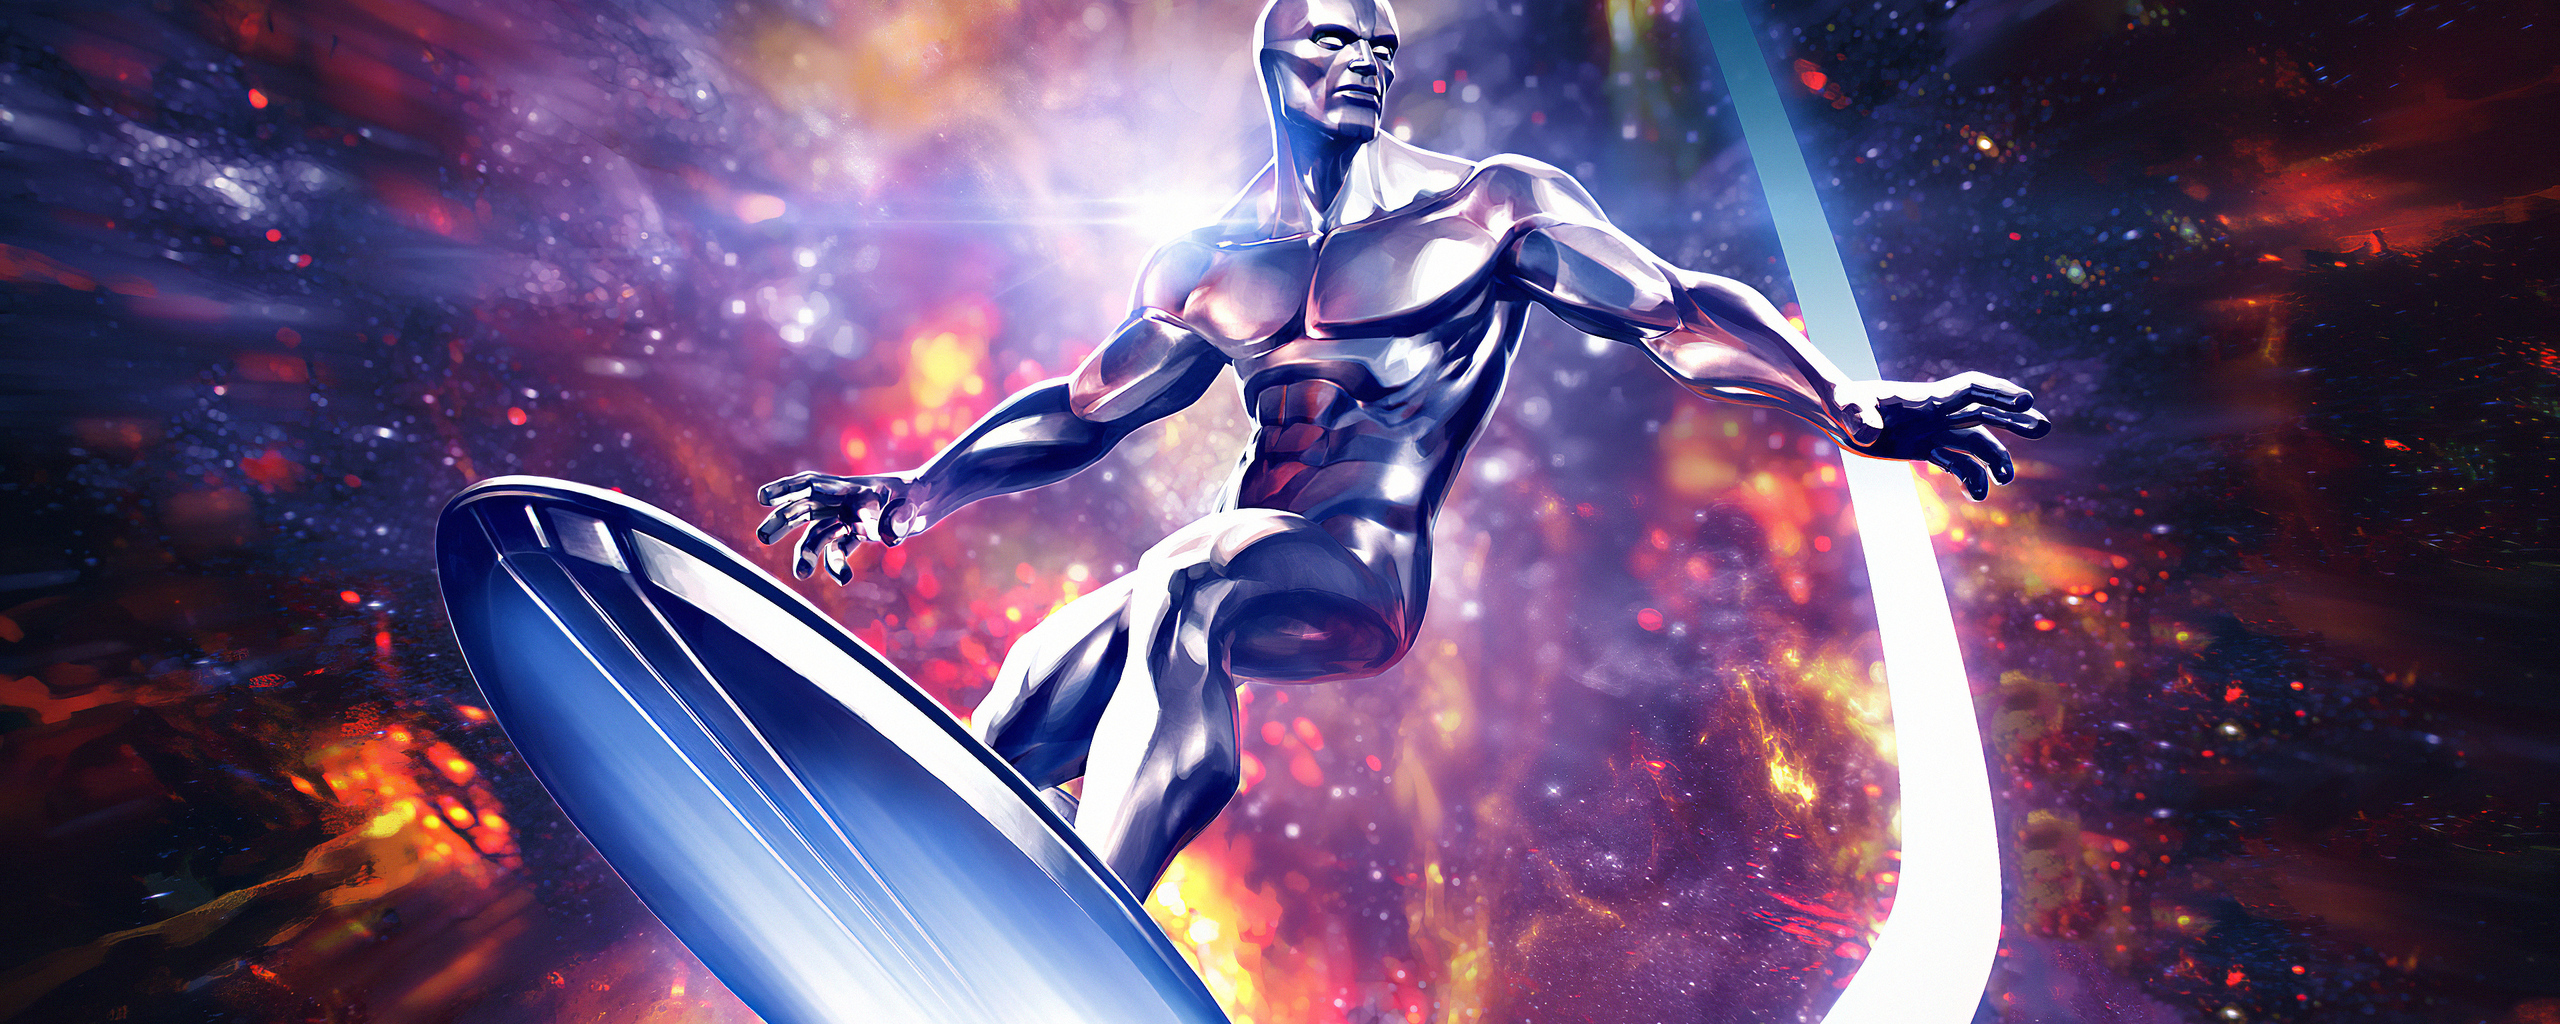 Silver Surfer Marvel Contest Of Champions In 2560x1024 Resolution. silver-s...